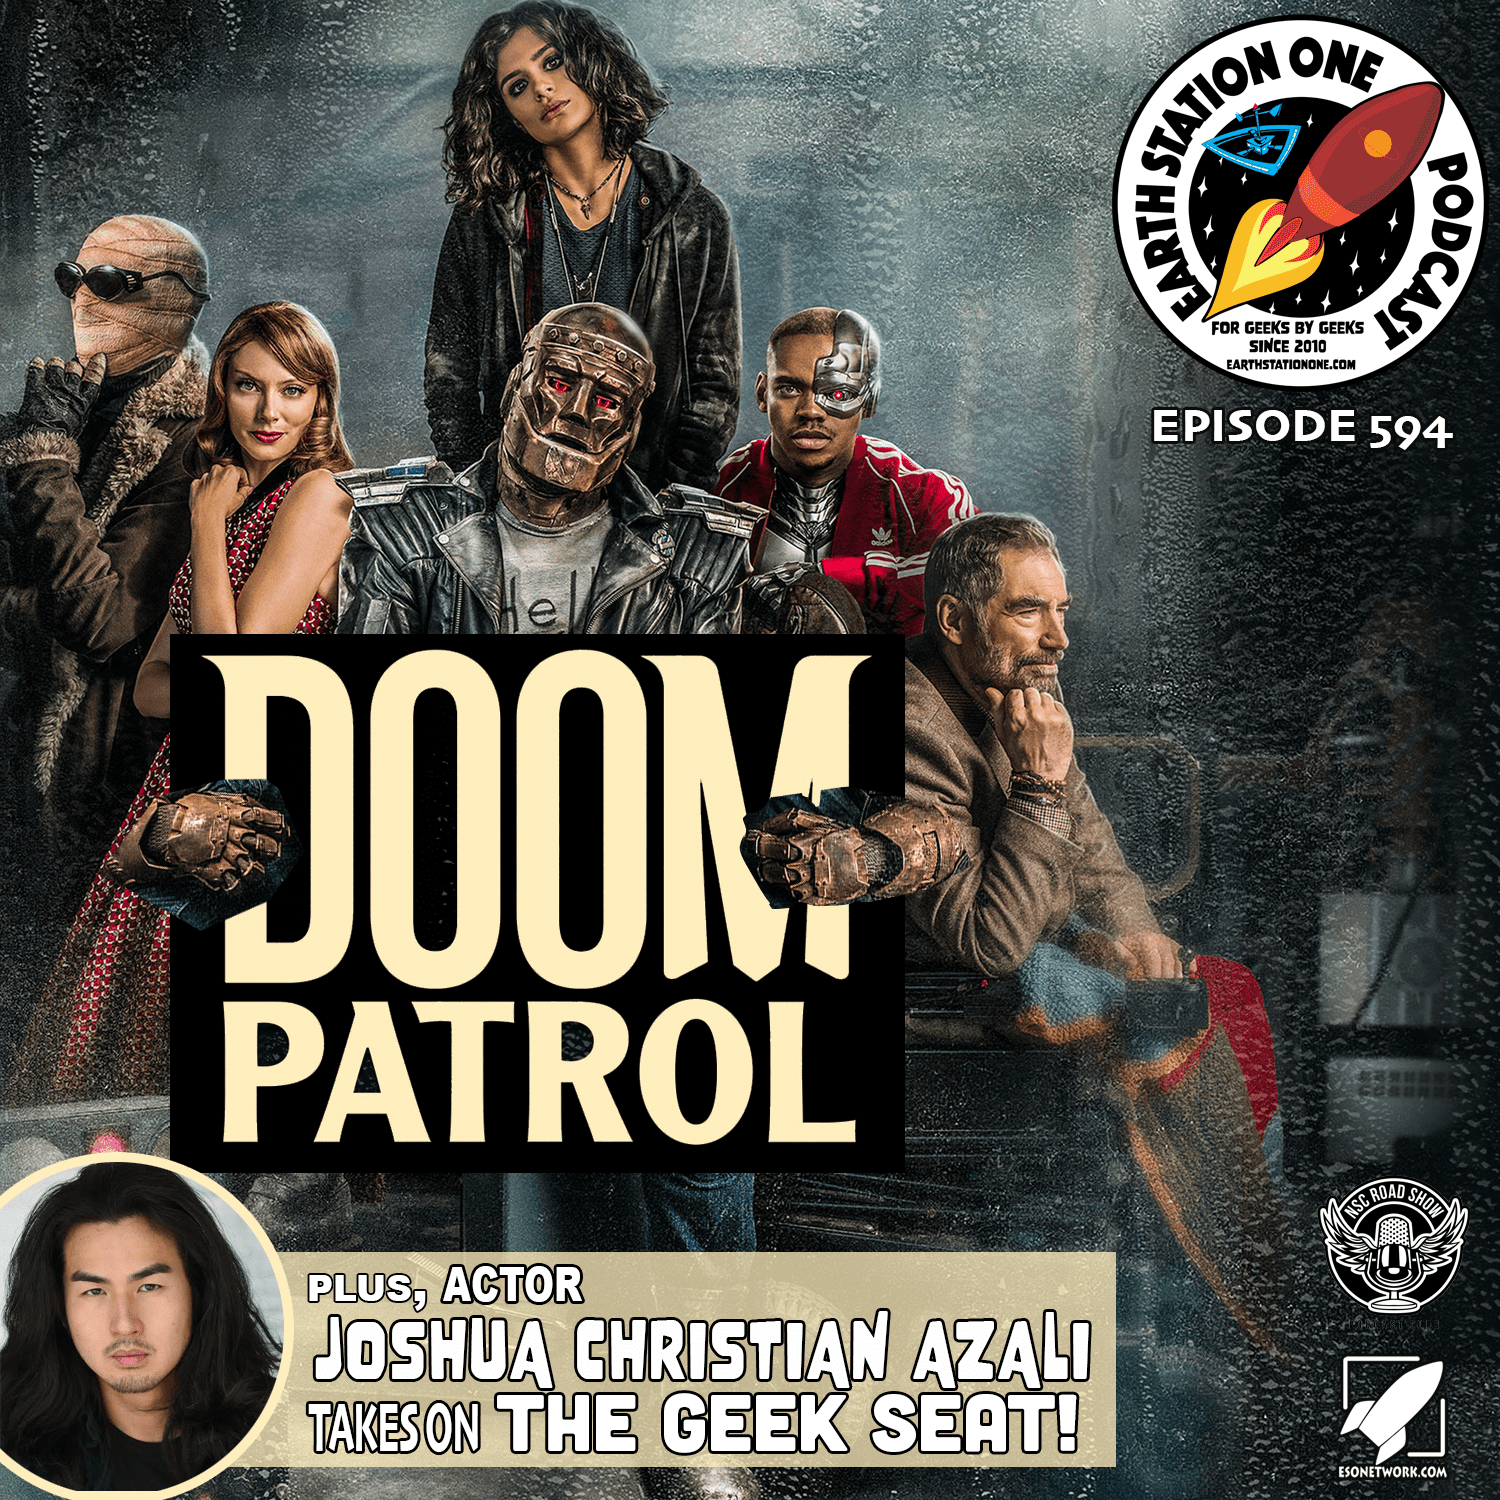 The Earth Station One Podcast - Doom Patrol